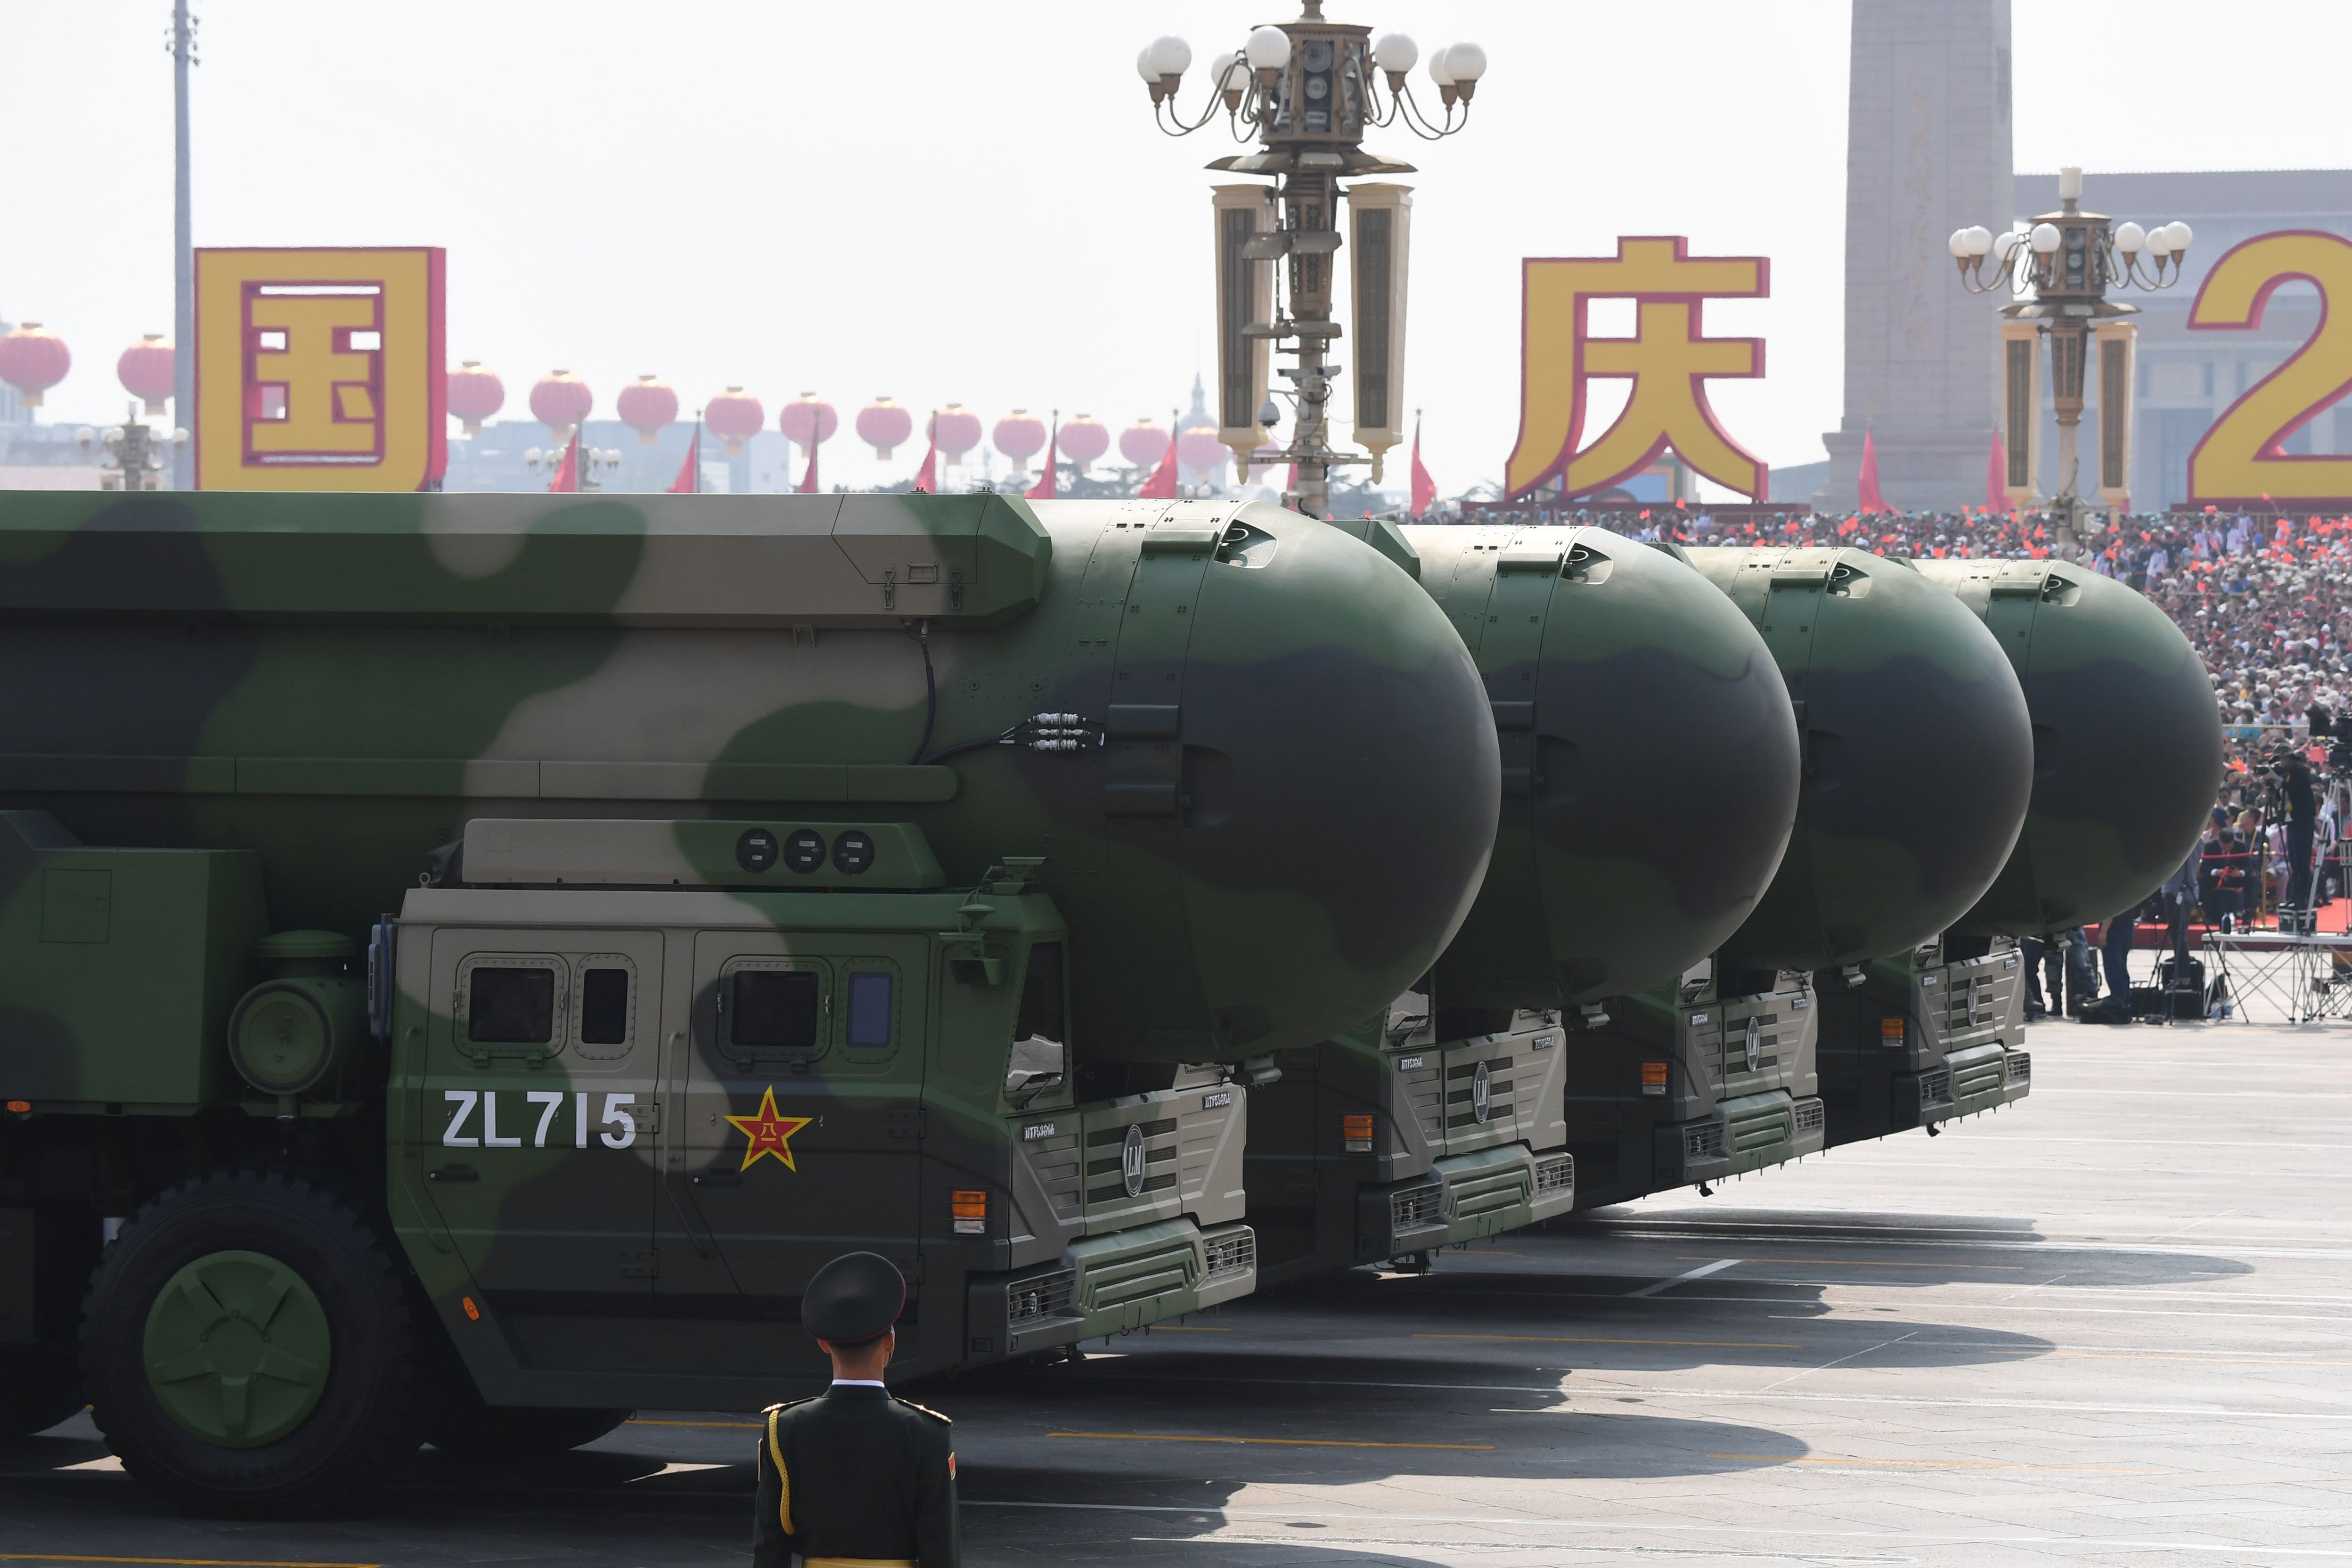 China declines to meet with US on nuclear arms control, US official says